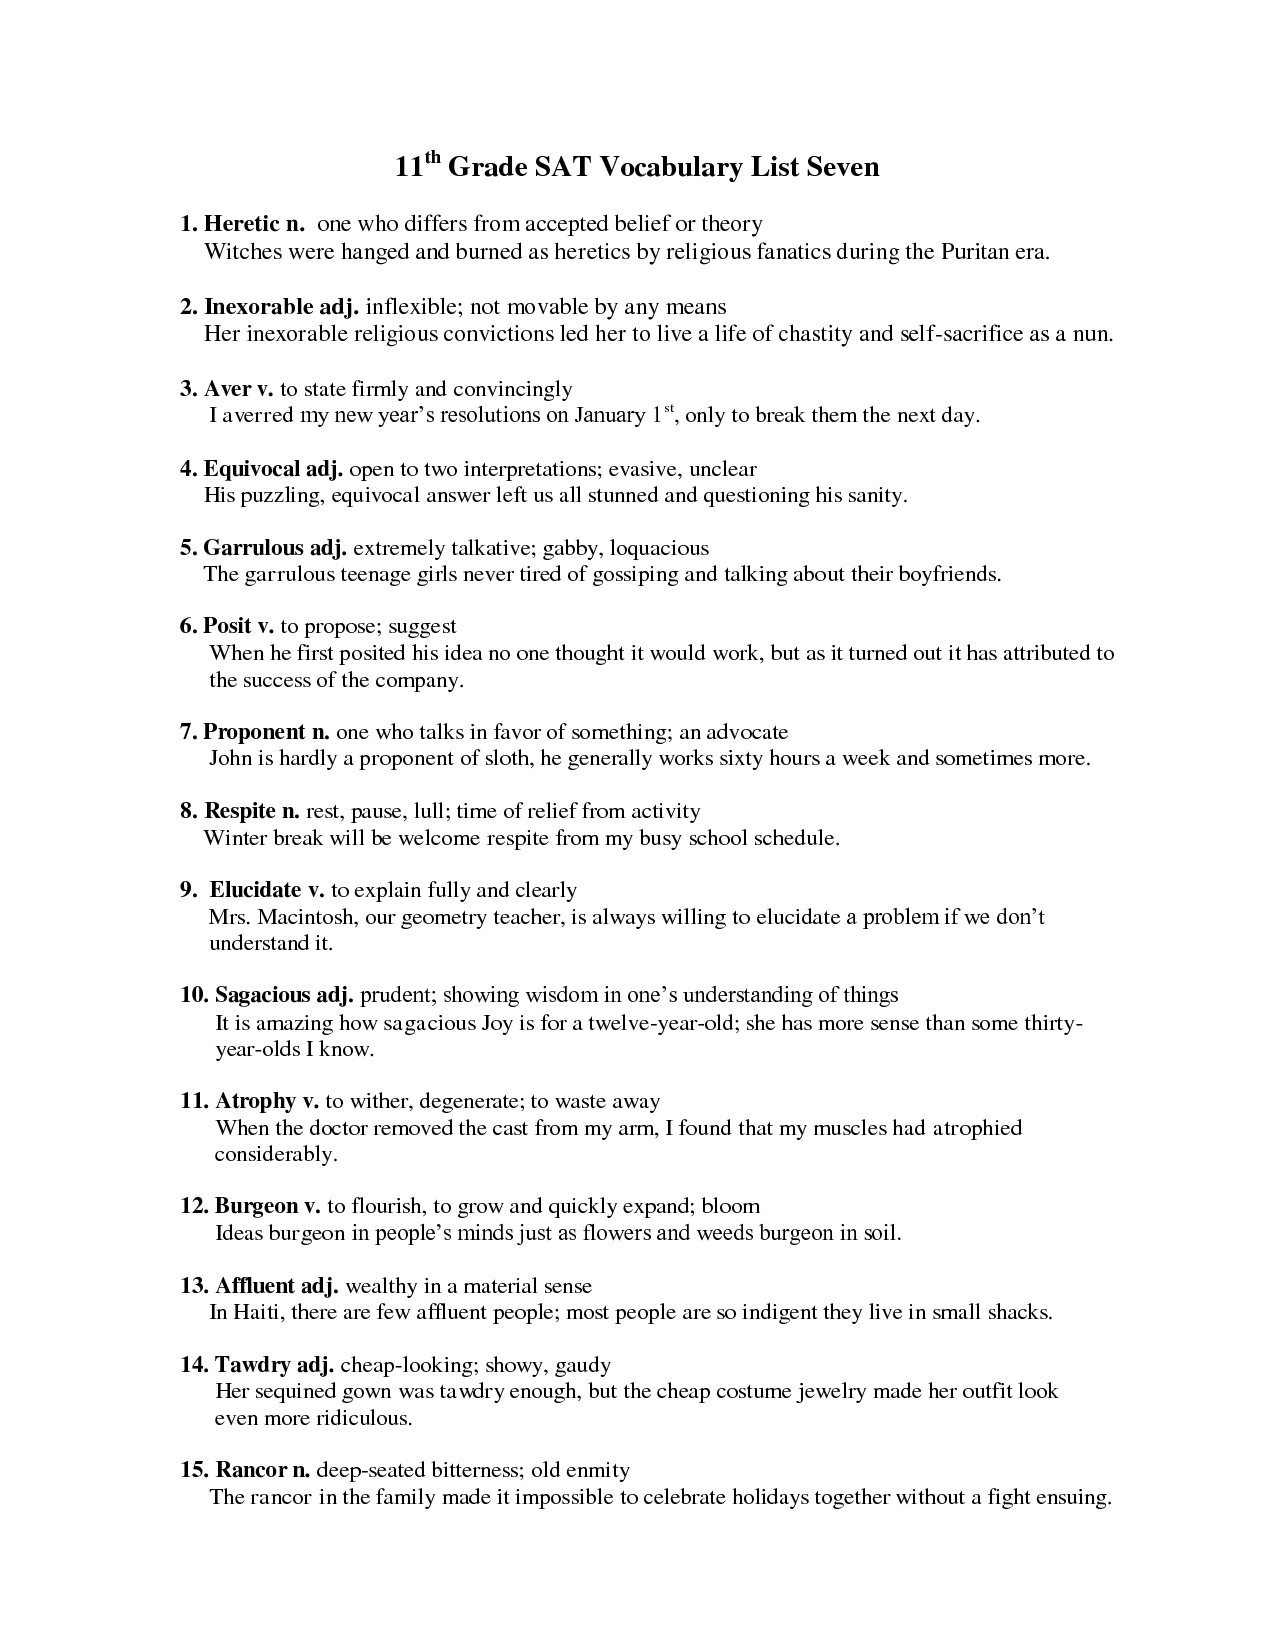 19-best-images-of-9th-grade-english-worksheets-printable-9th-grade-math-worksheets-printable